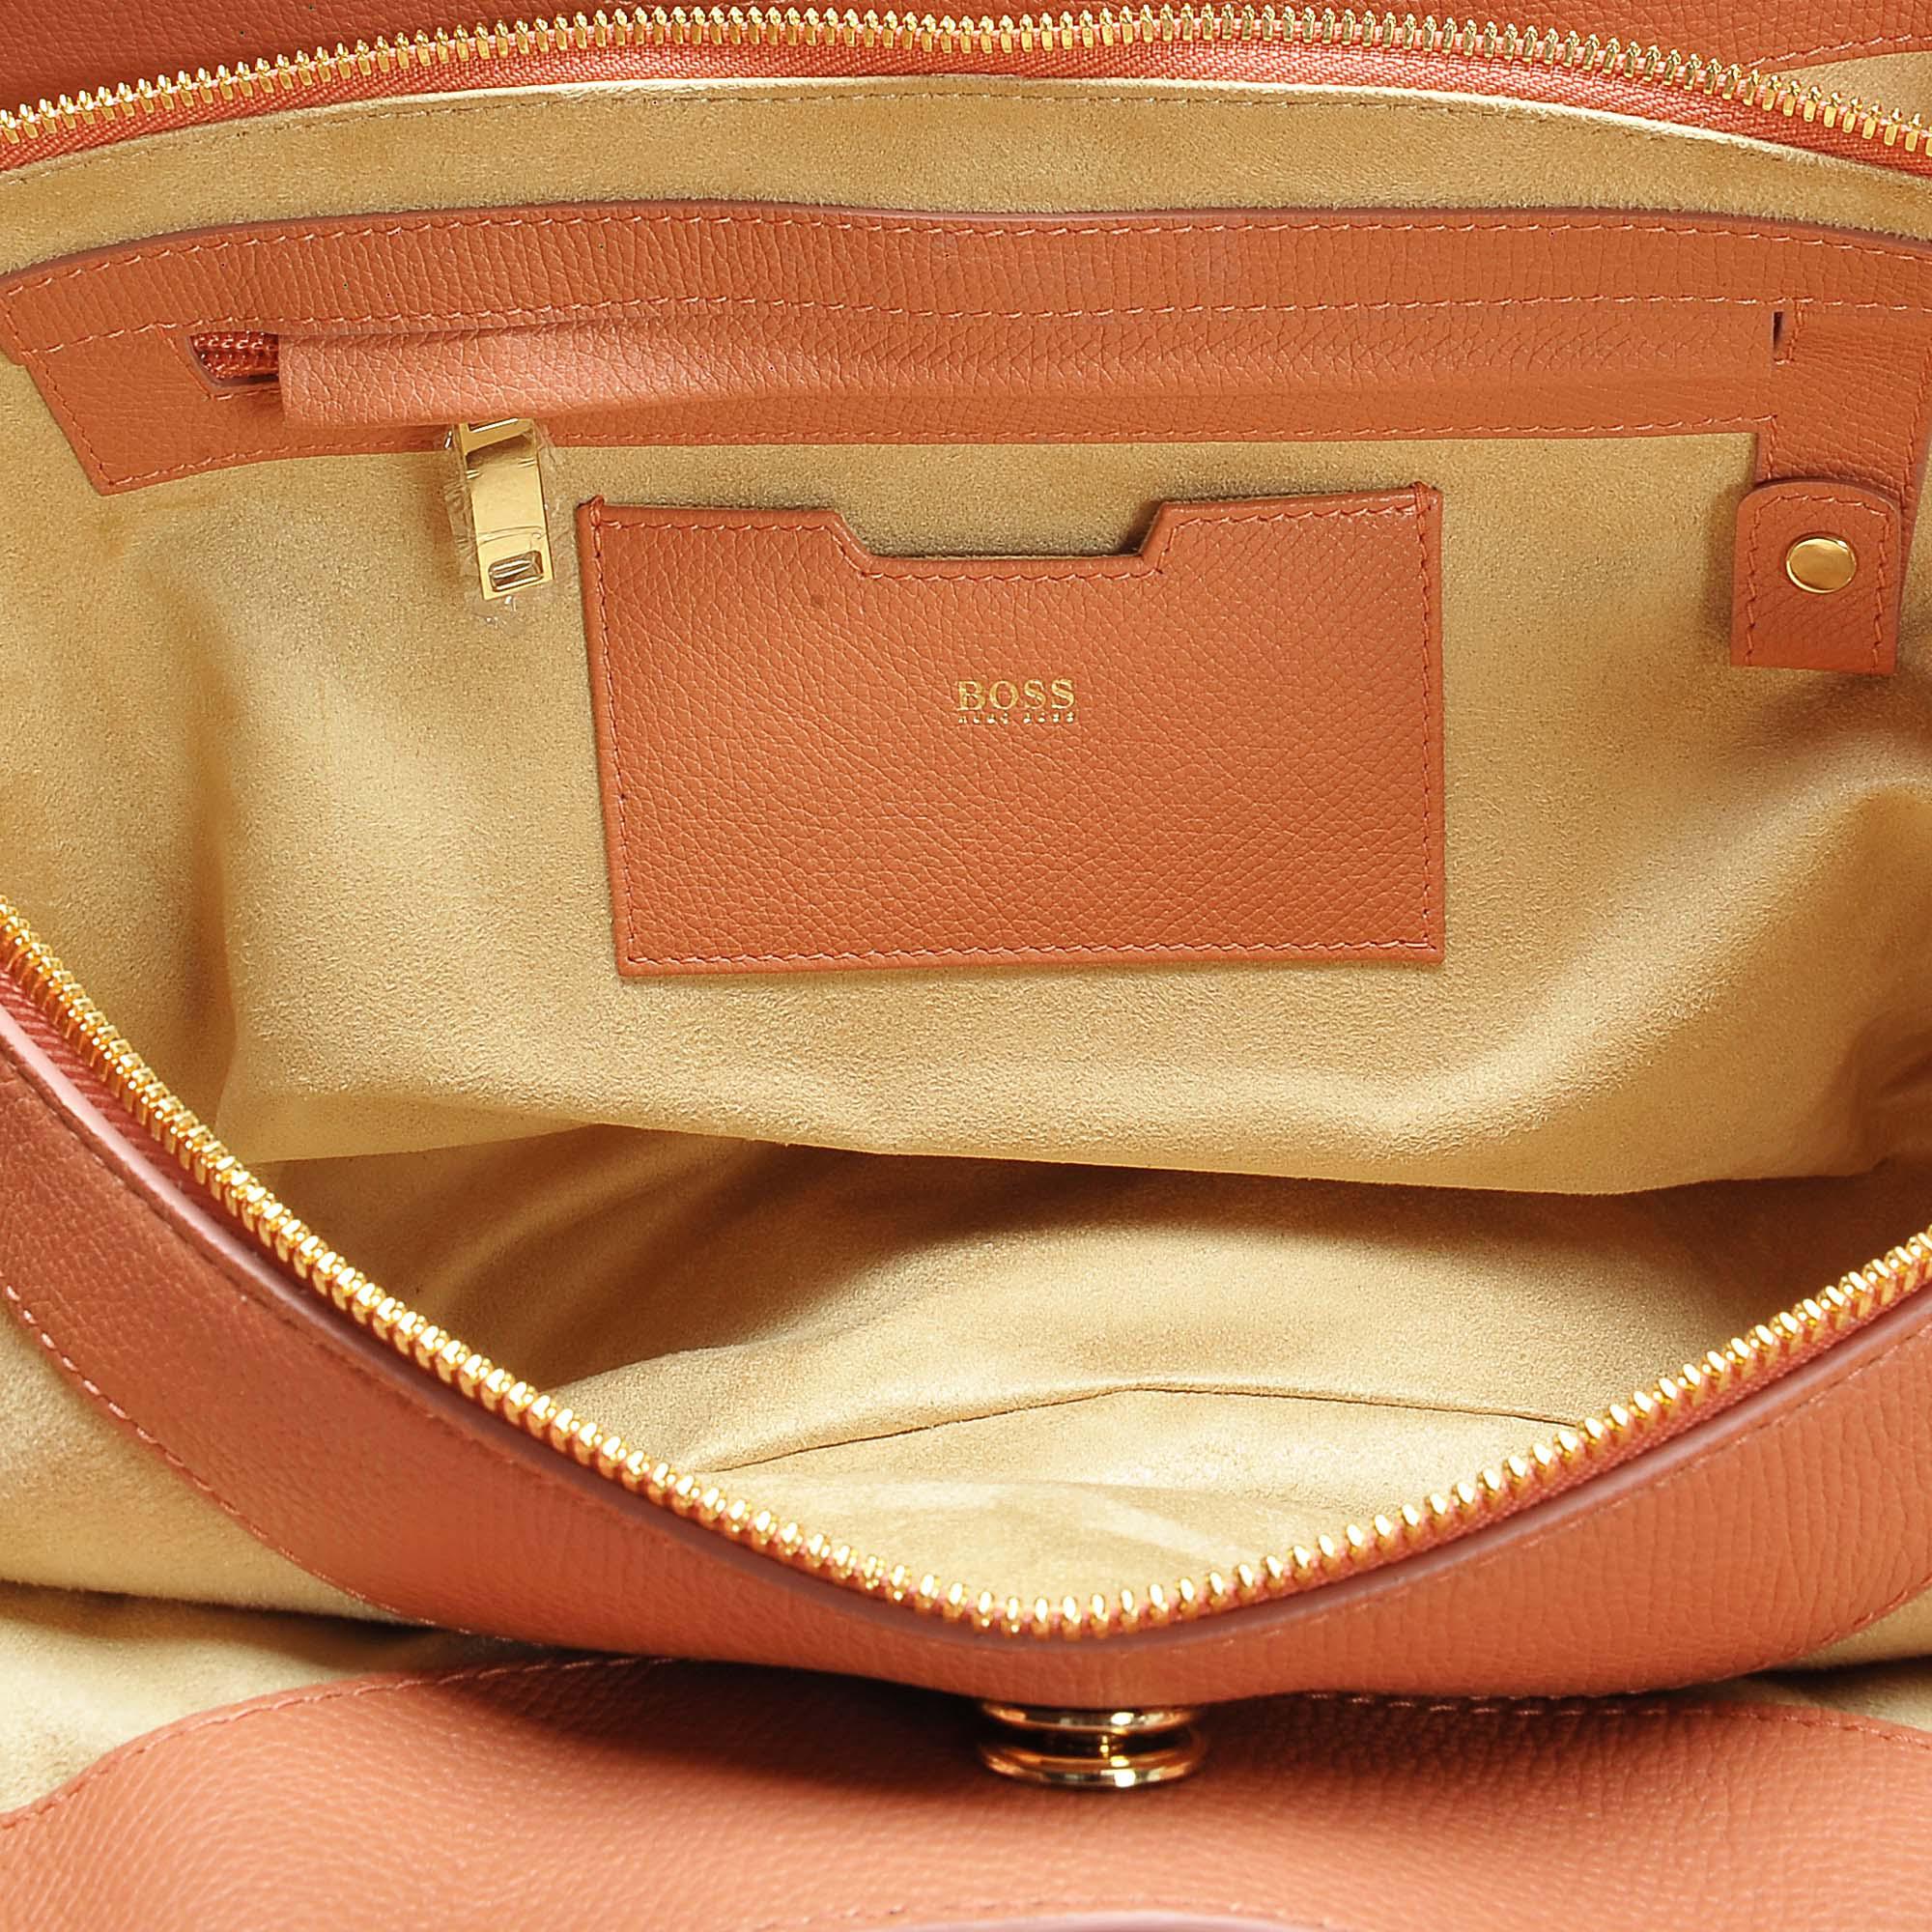 BOSS by HUGO BOSS Taylor Tote in Beige (Natural) - Lyst